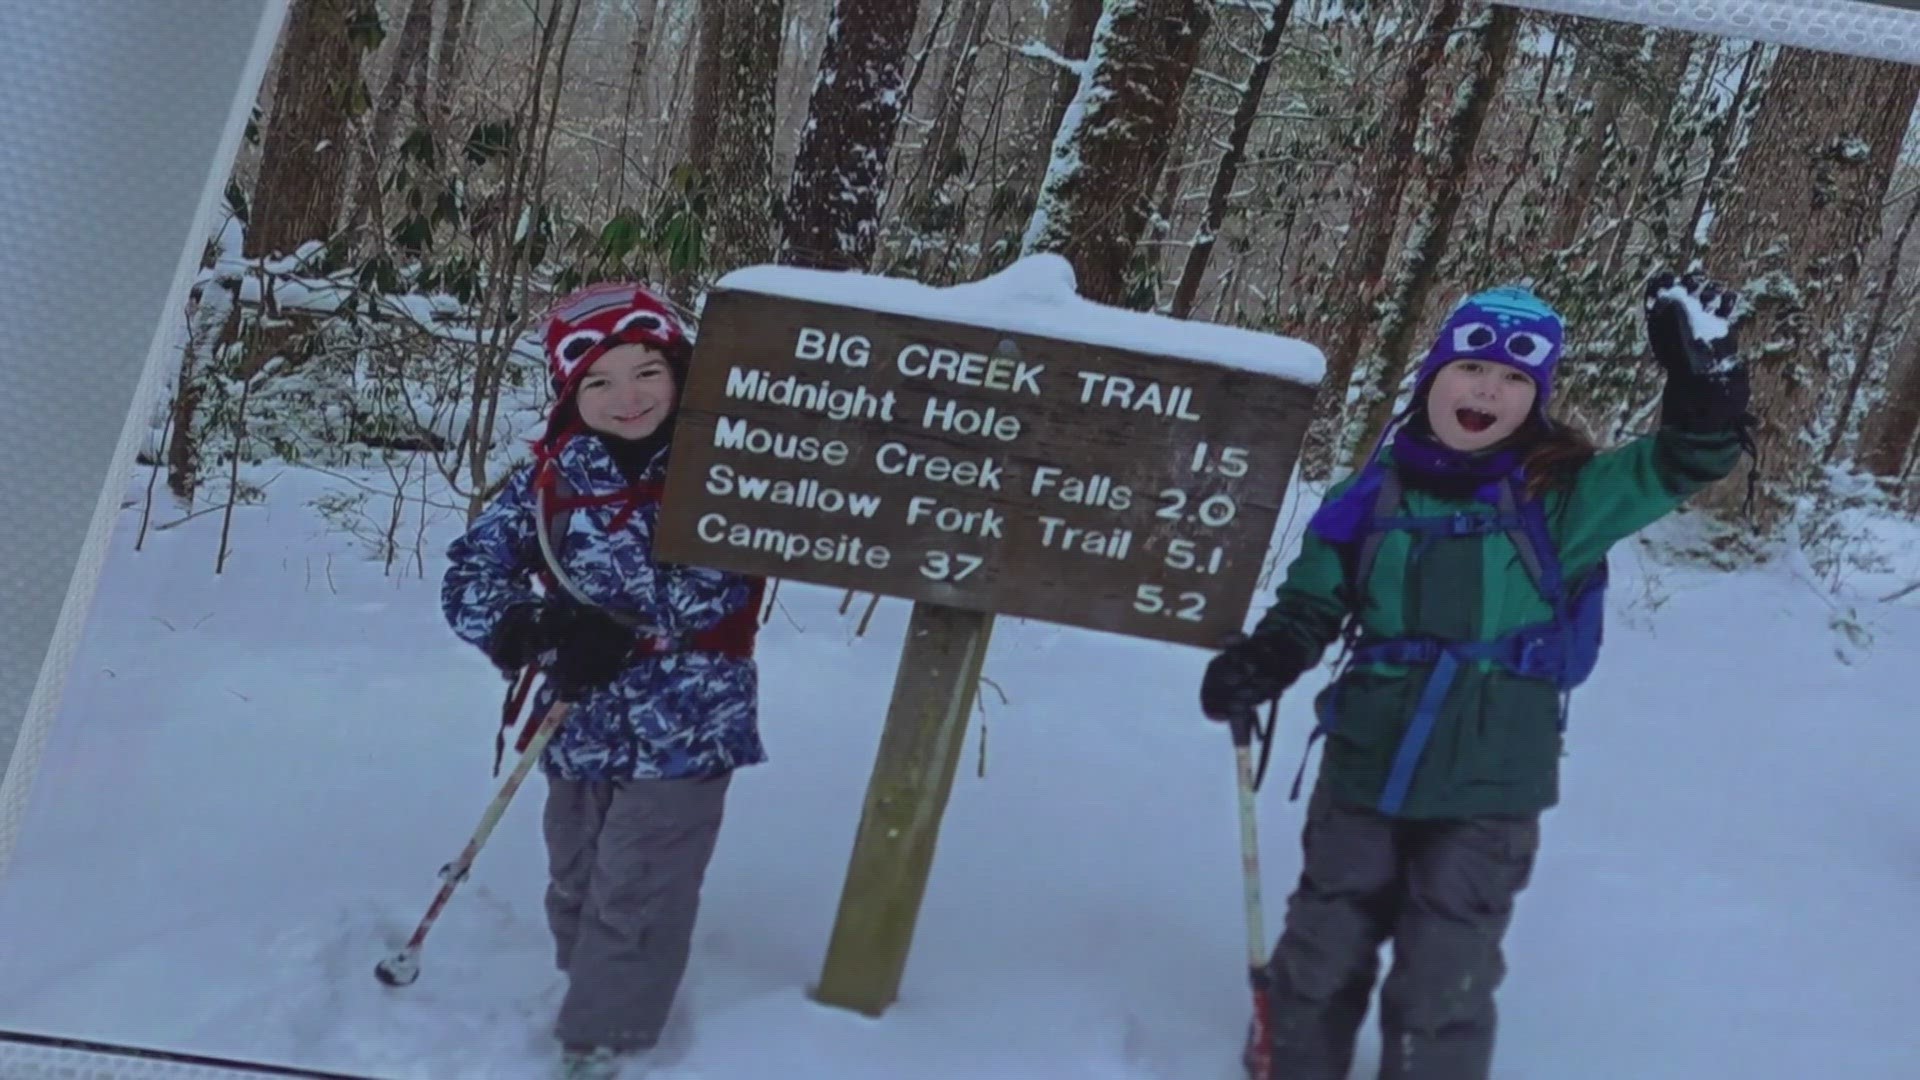 10-year-old Elizabeth and 8-year-old Landon are the youngest to have hiked all the maintained trailers in the Great Smoky Mountain National Park.